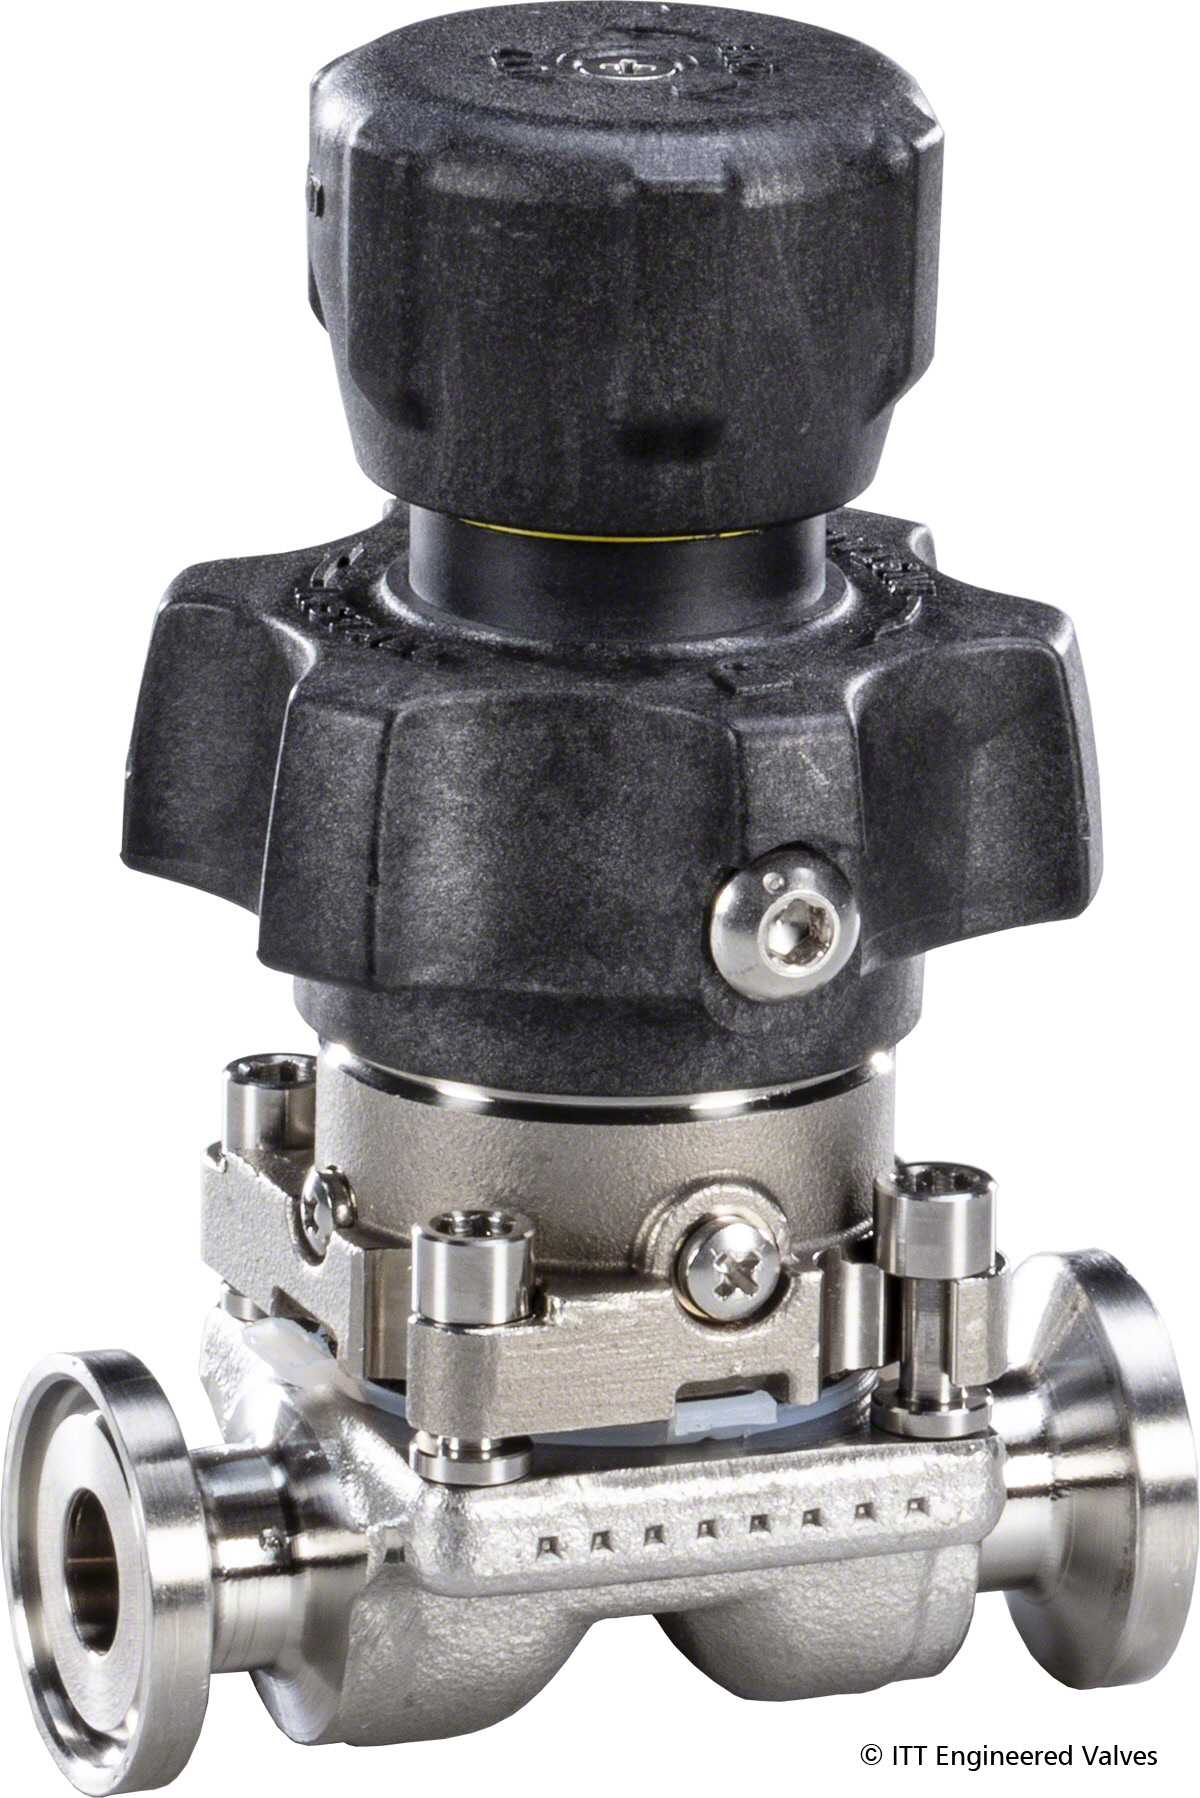 The new size valve is designed for the critical reliability needs of sampling and low flow bioprocess applications.